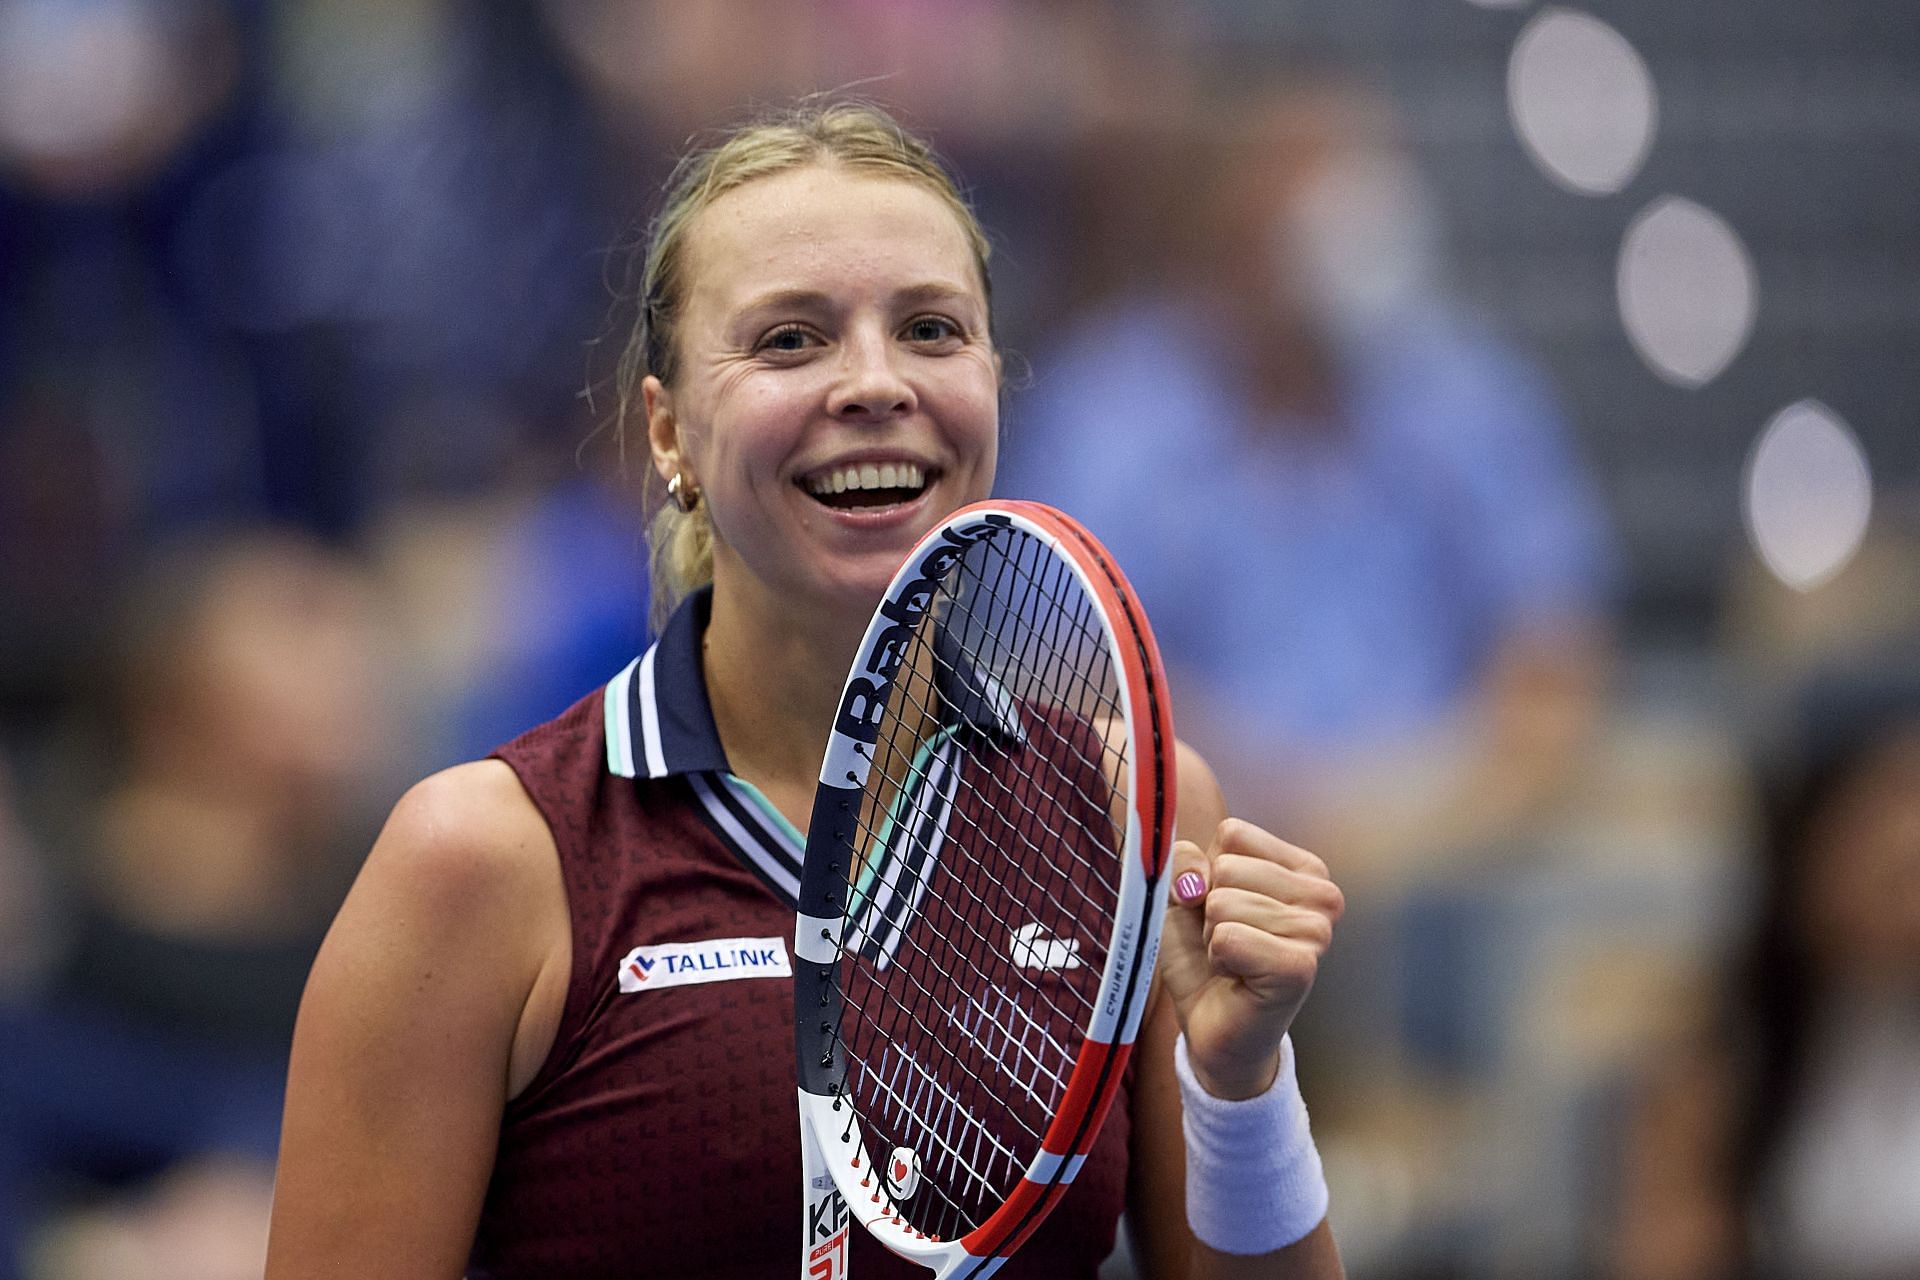 Anett Kontaveit registered a 29-16 win-loss record for the year.